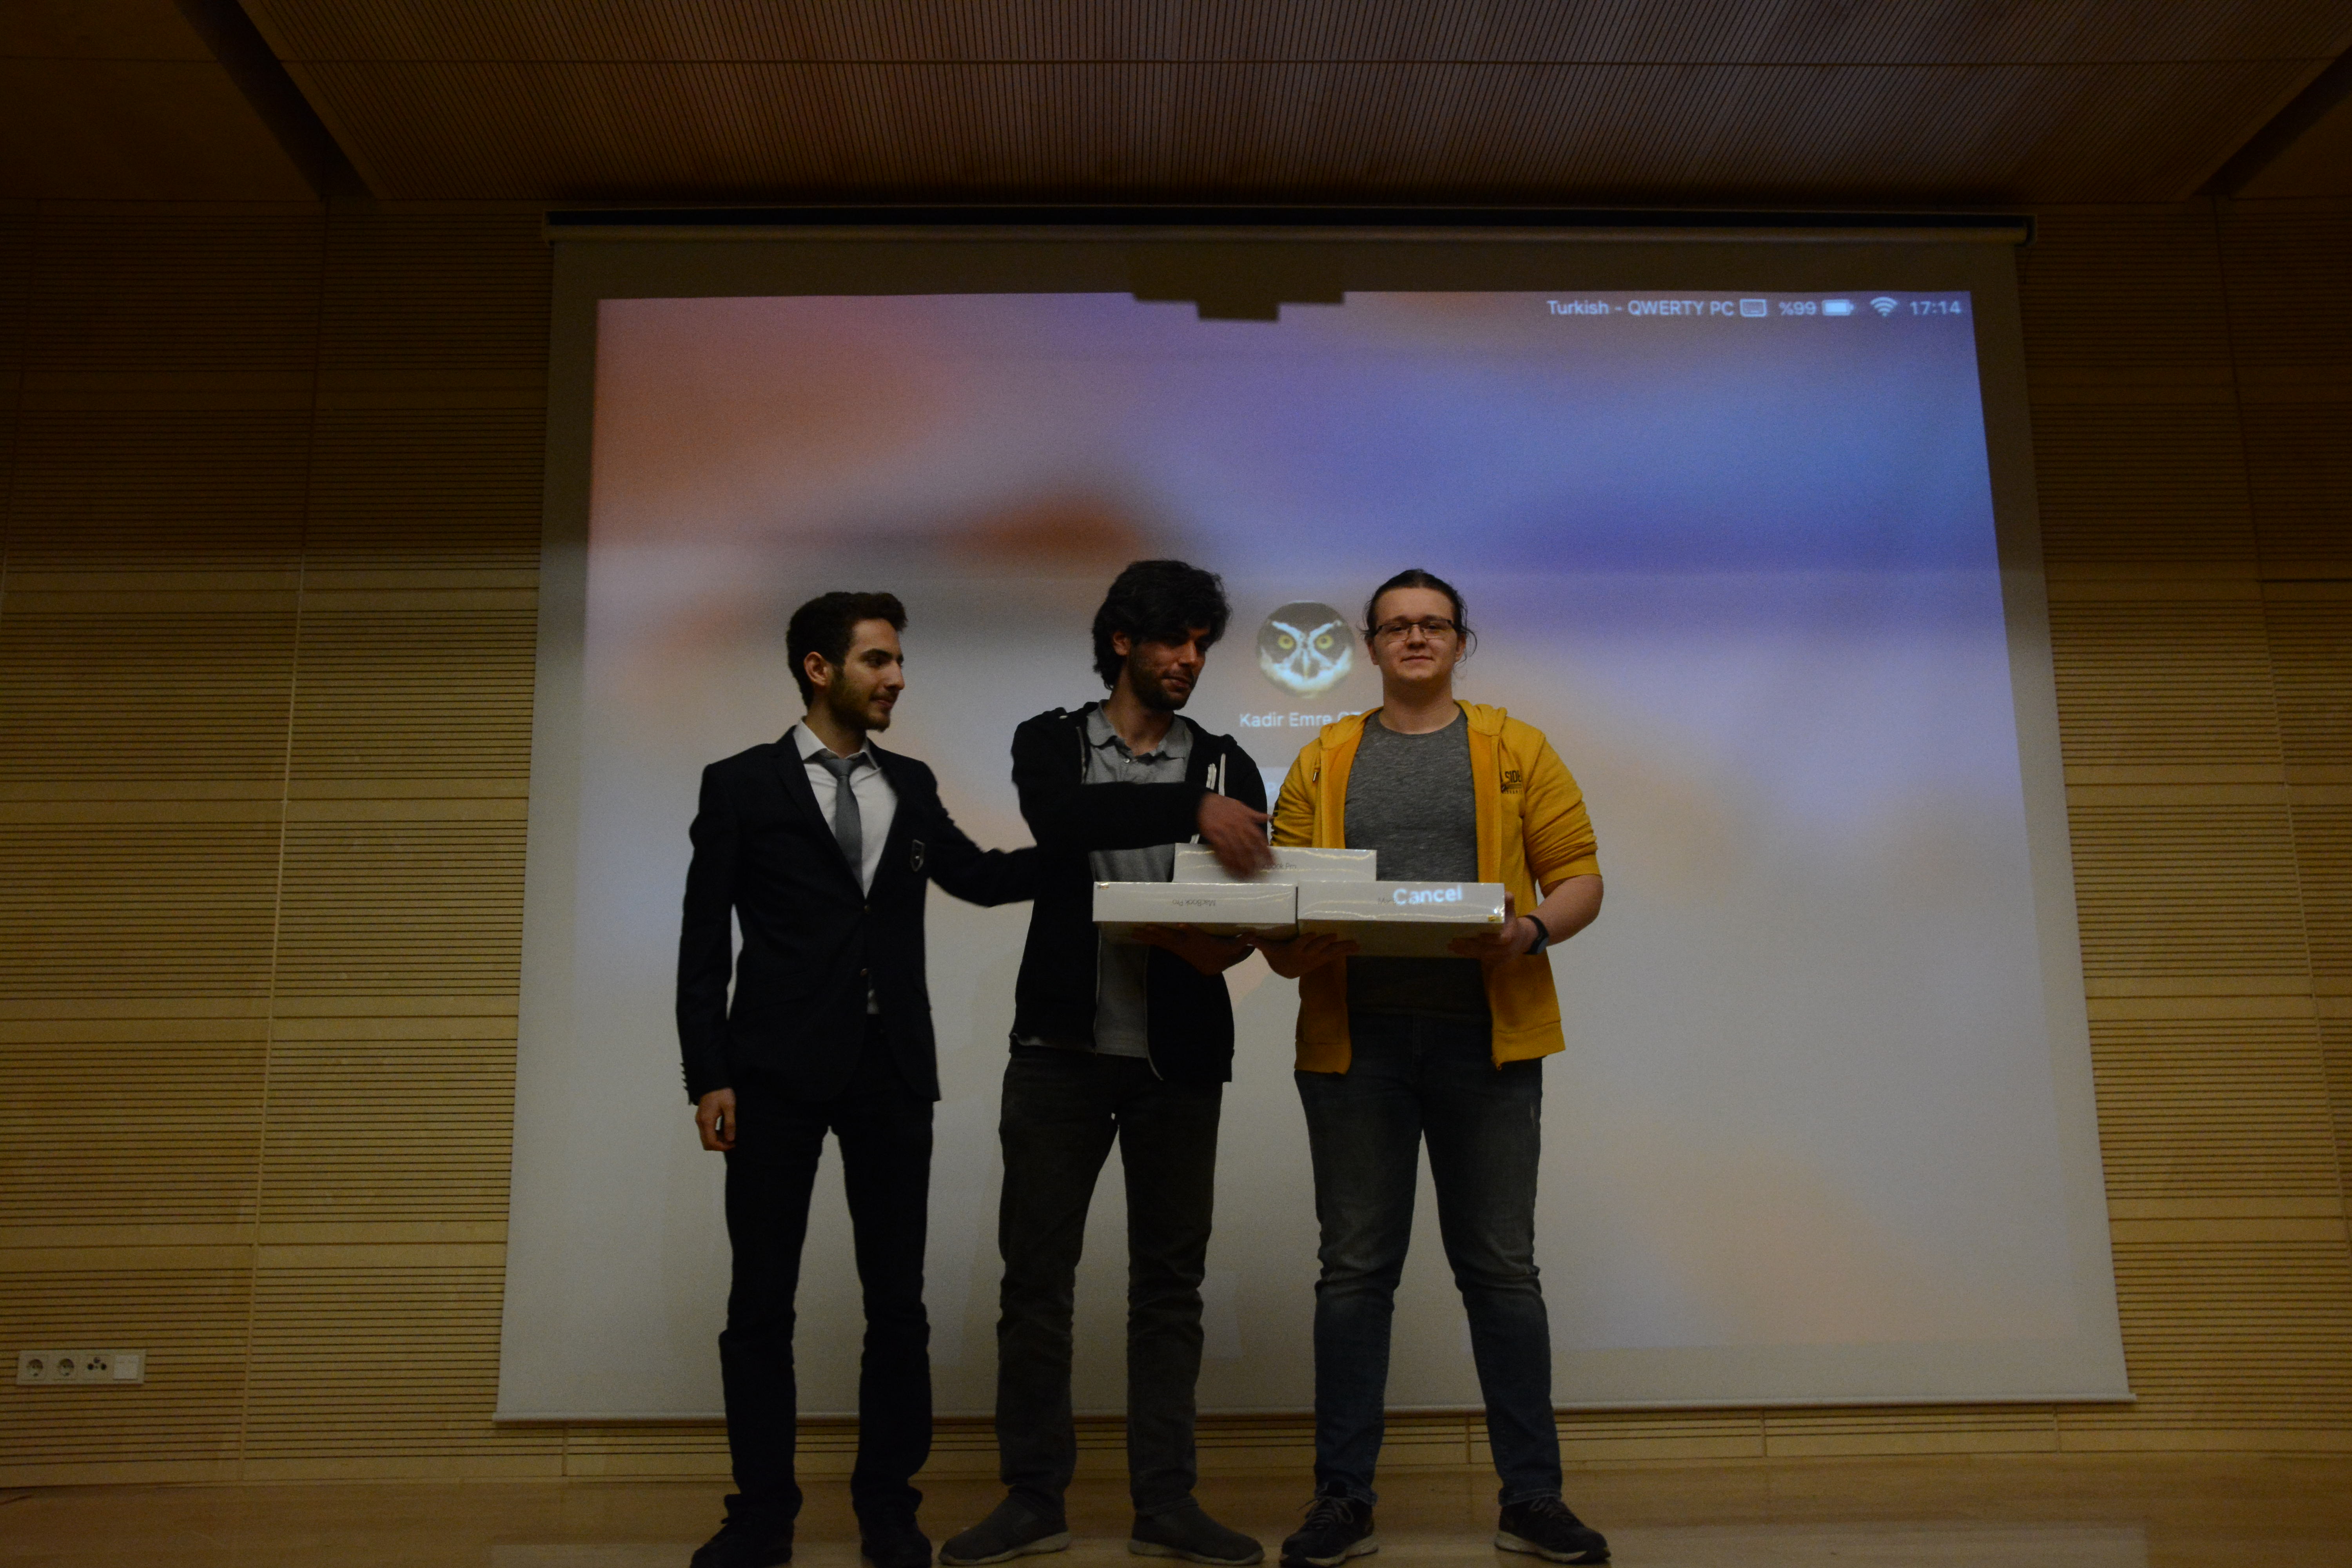 The Students of the Department of Computer Engineering of TOBB ETÜ Returned with Awards from the Programming Contests